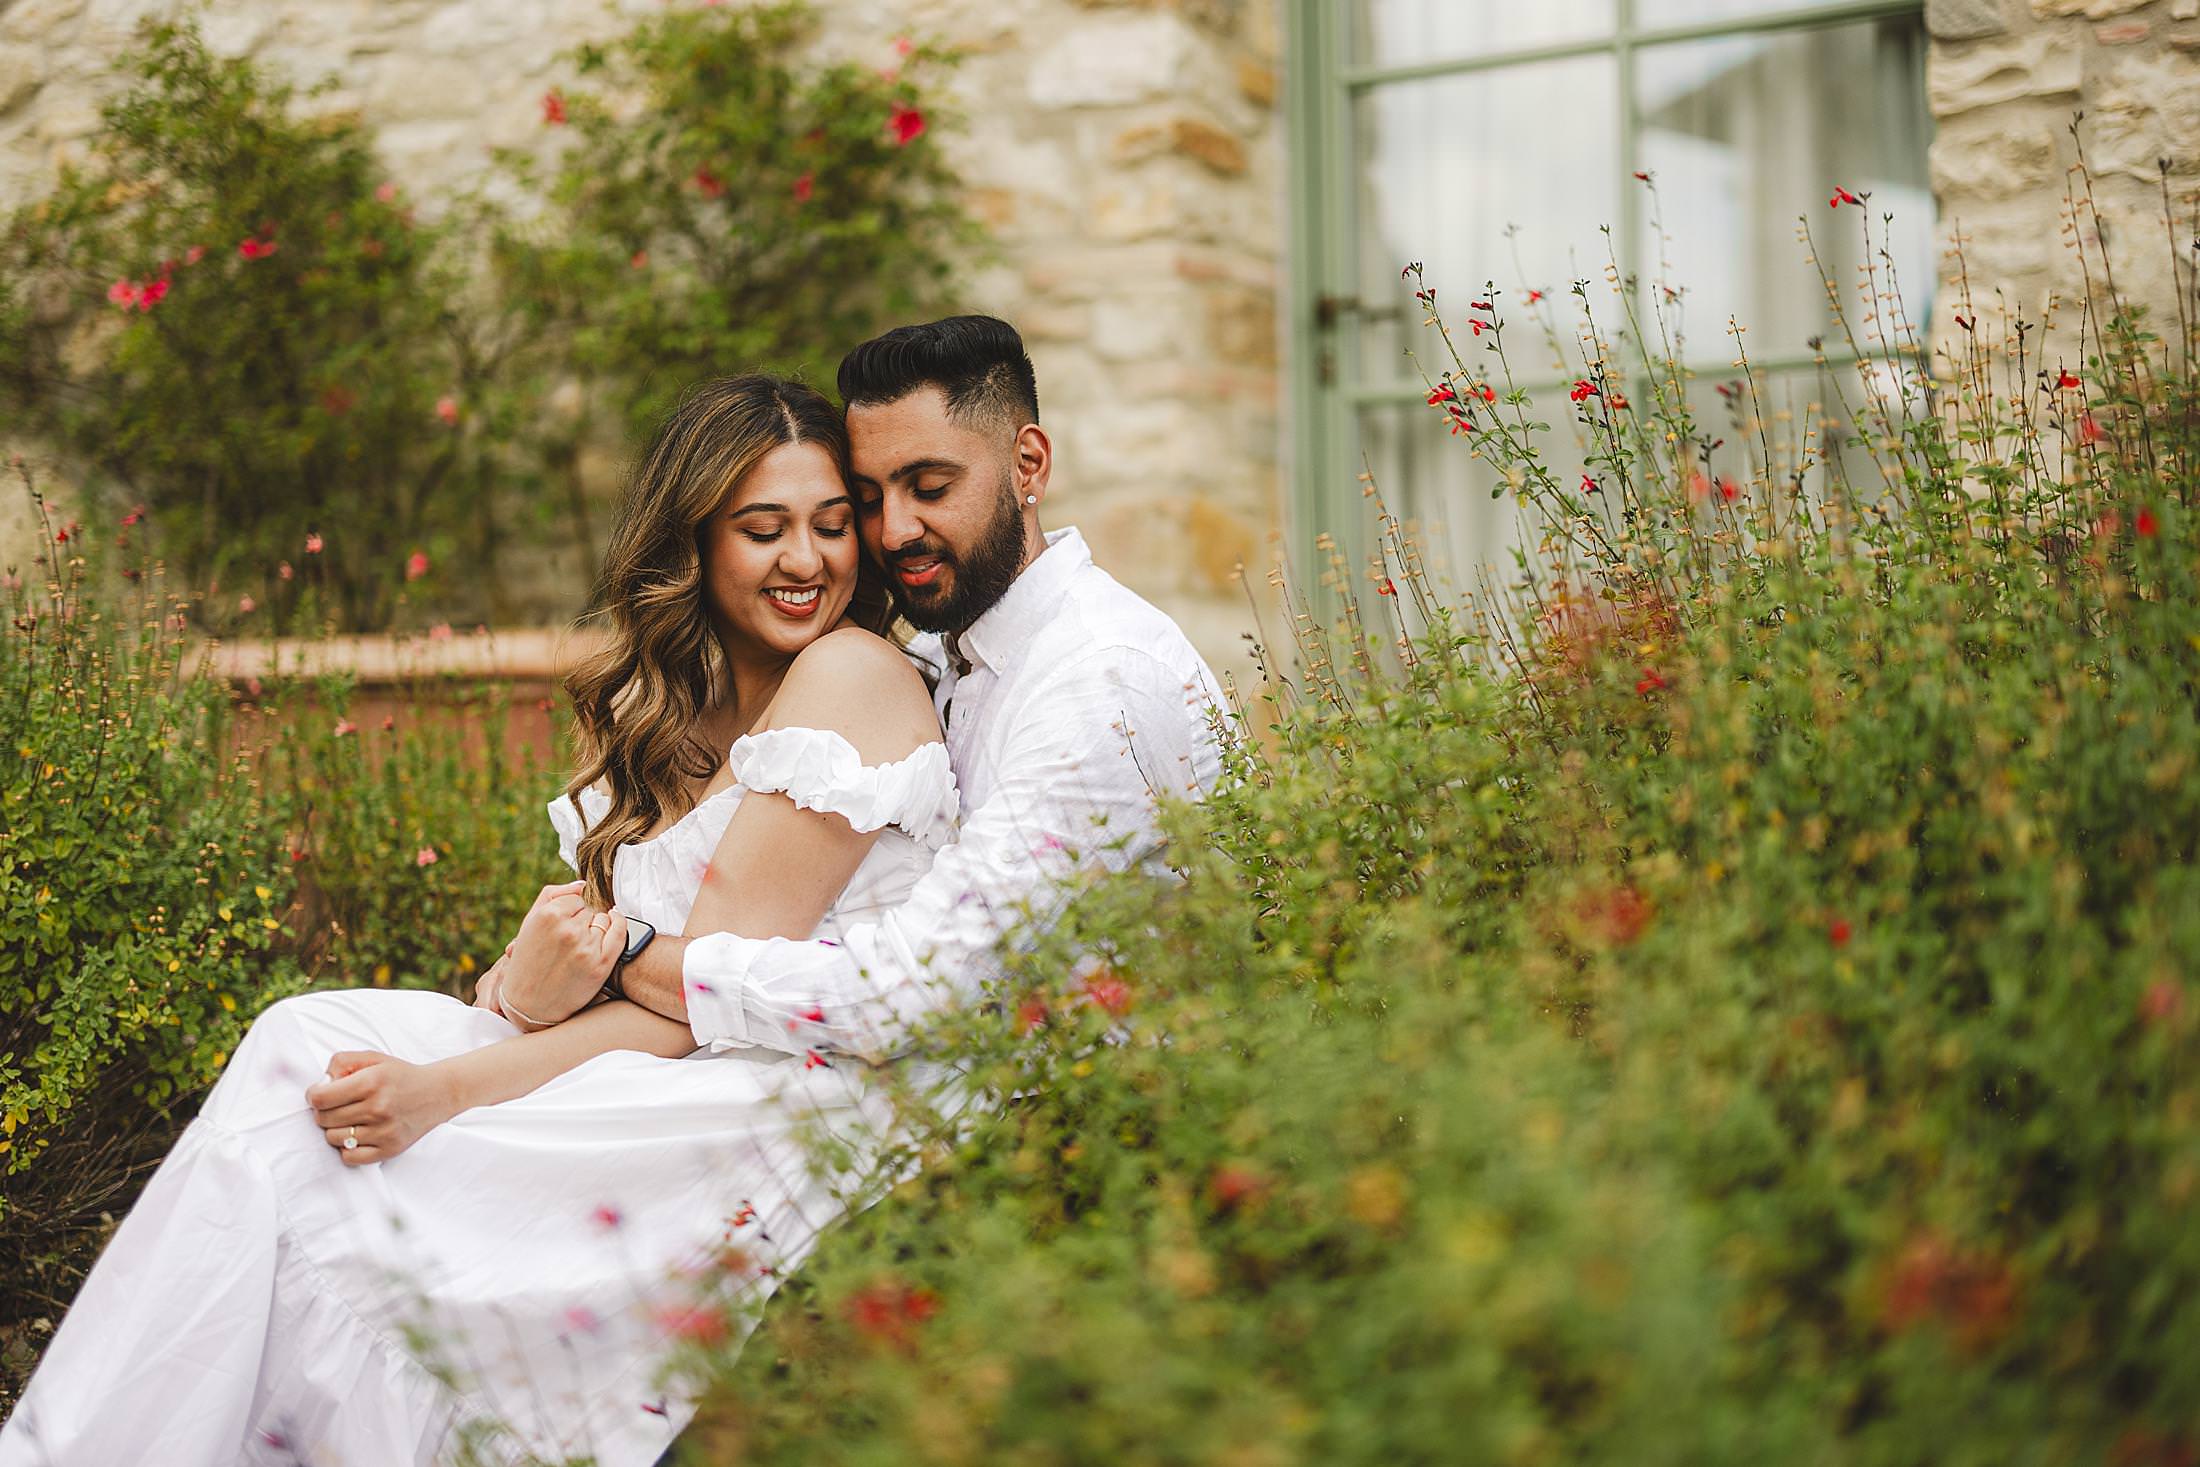 Romantic and lovely couple engagement session at Borgo del Cabreo charming venue